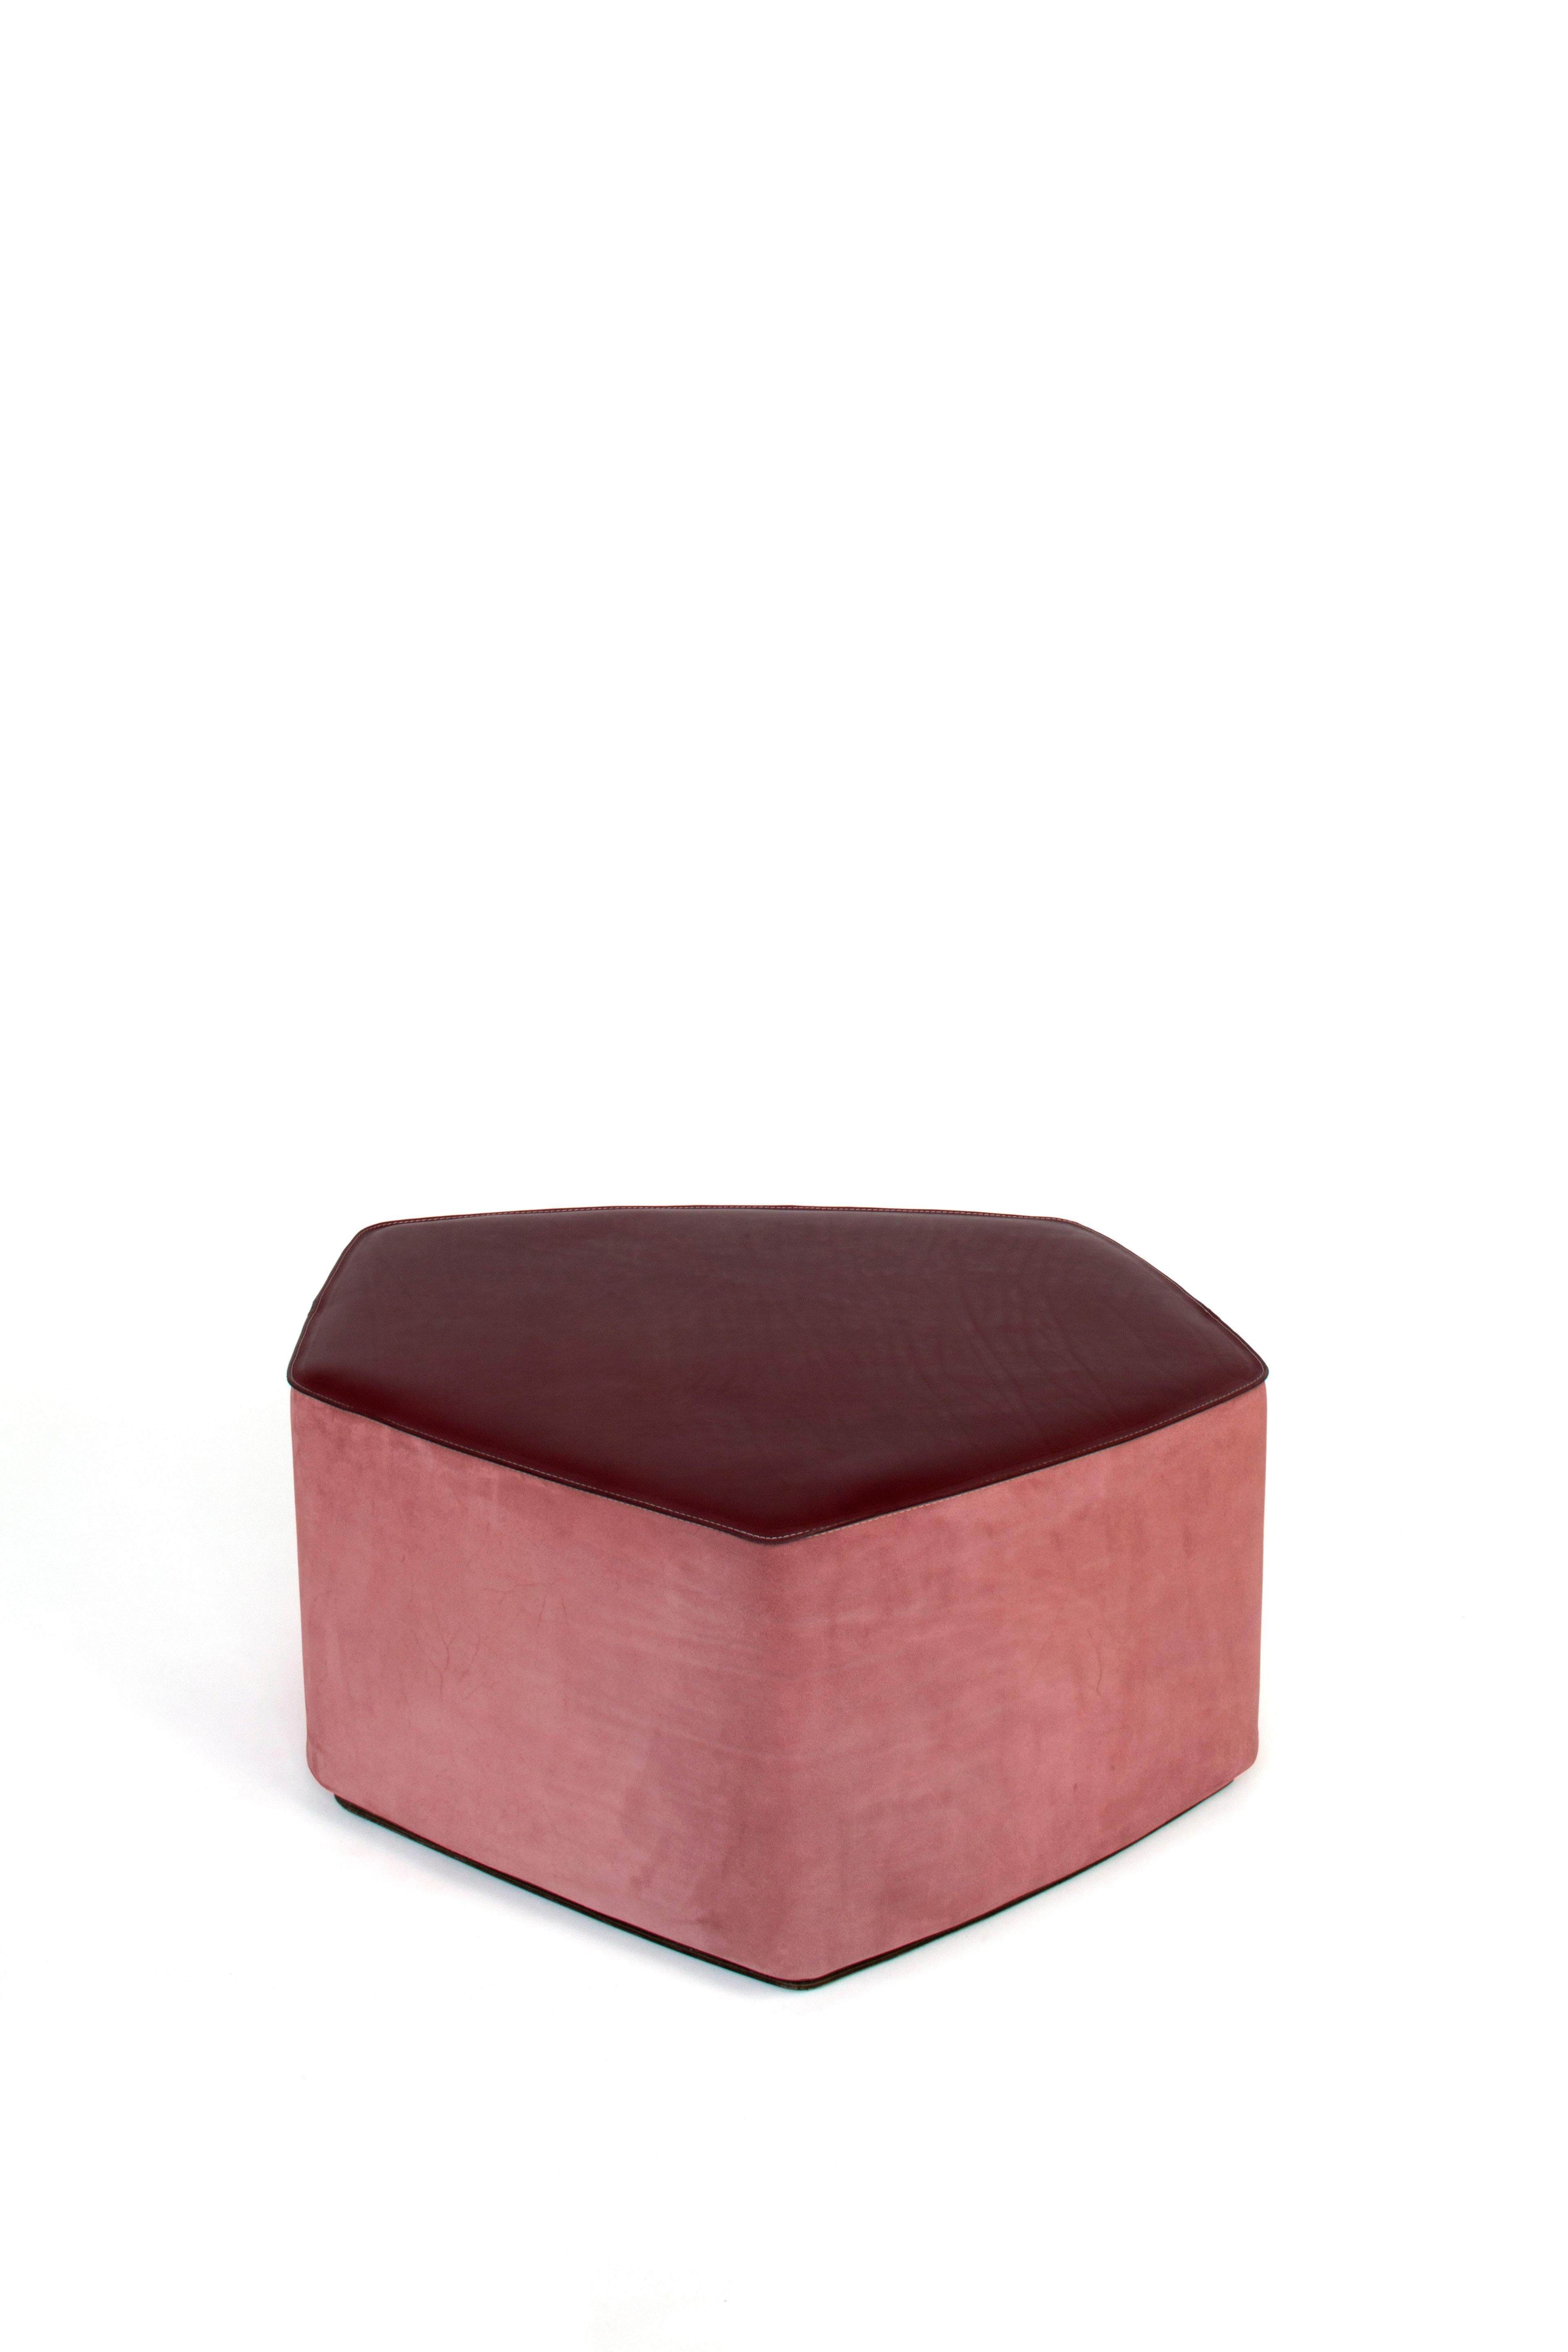 Set of 3 Pouf! Leather Stools by Nestor Perkal For Sale 3